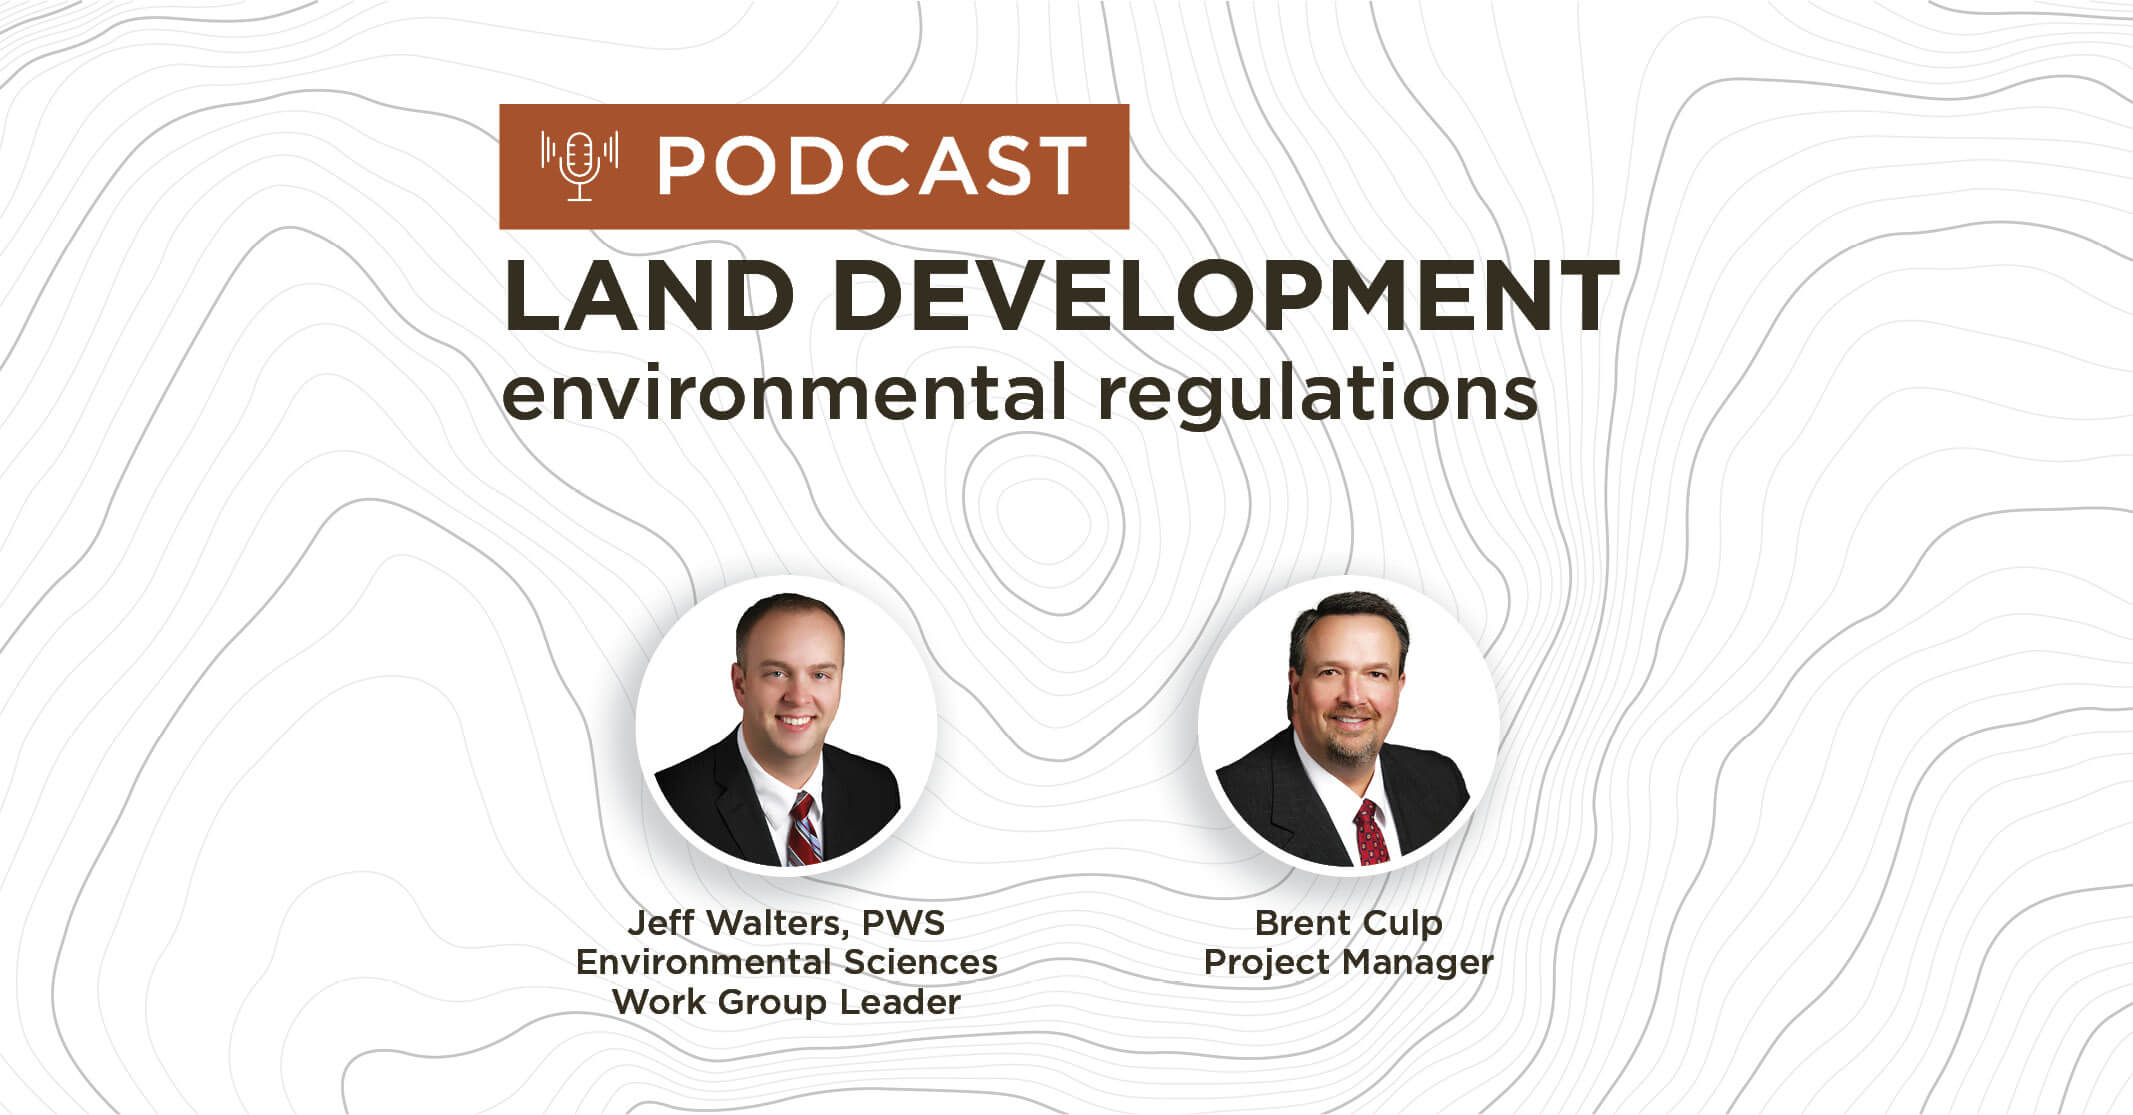 Permitting for Site Development Projects Podcast